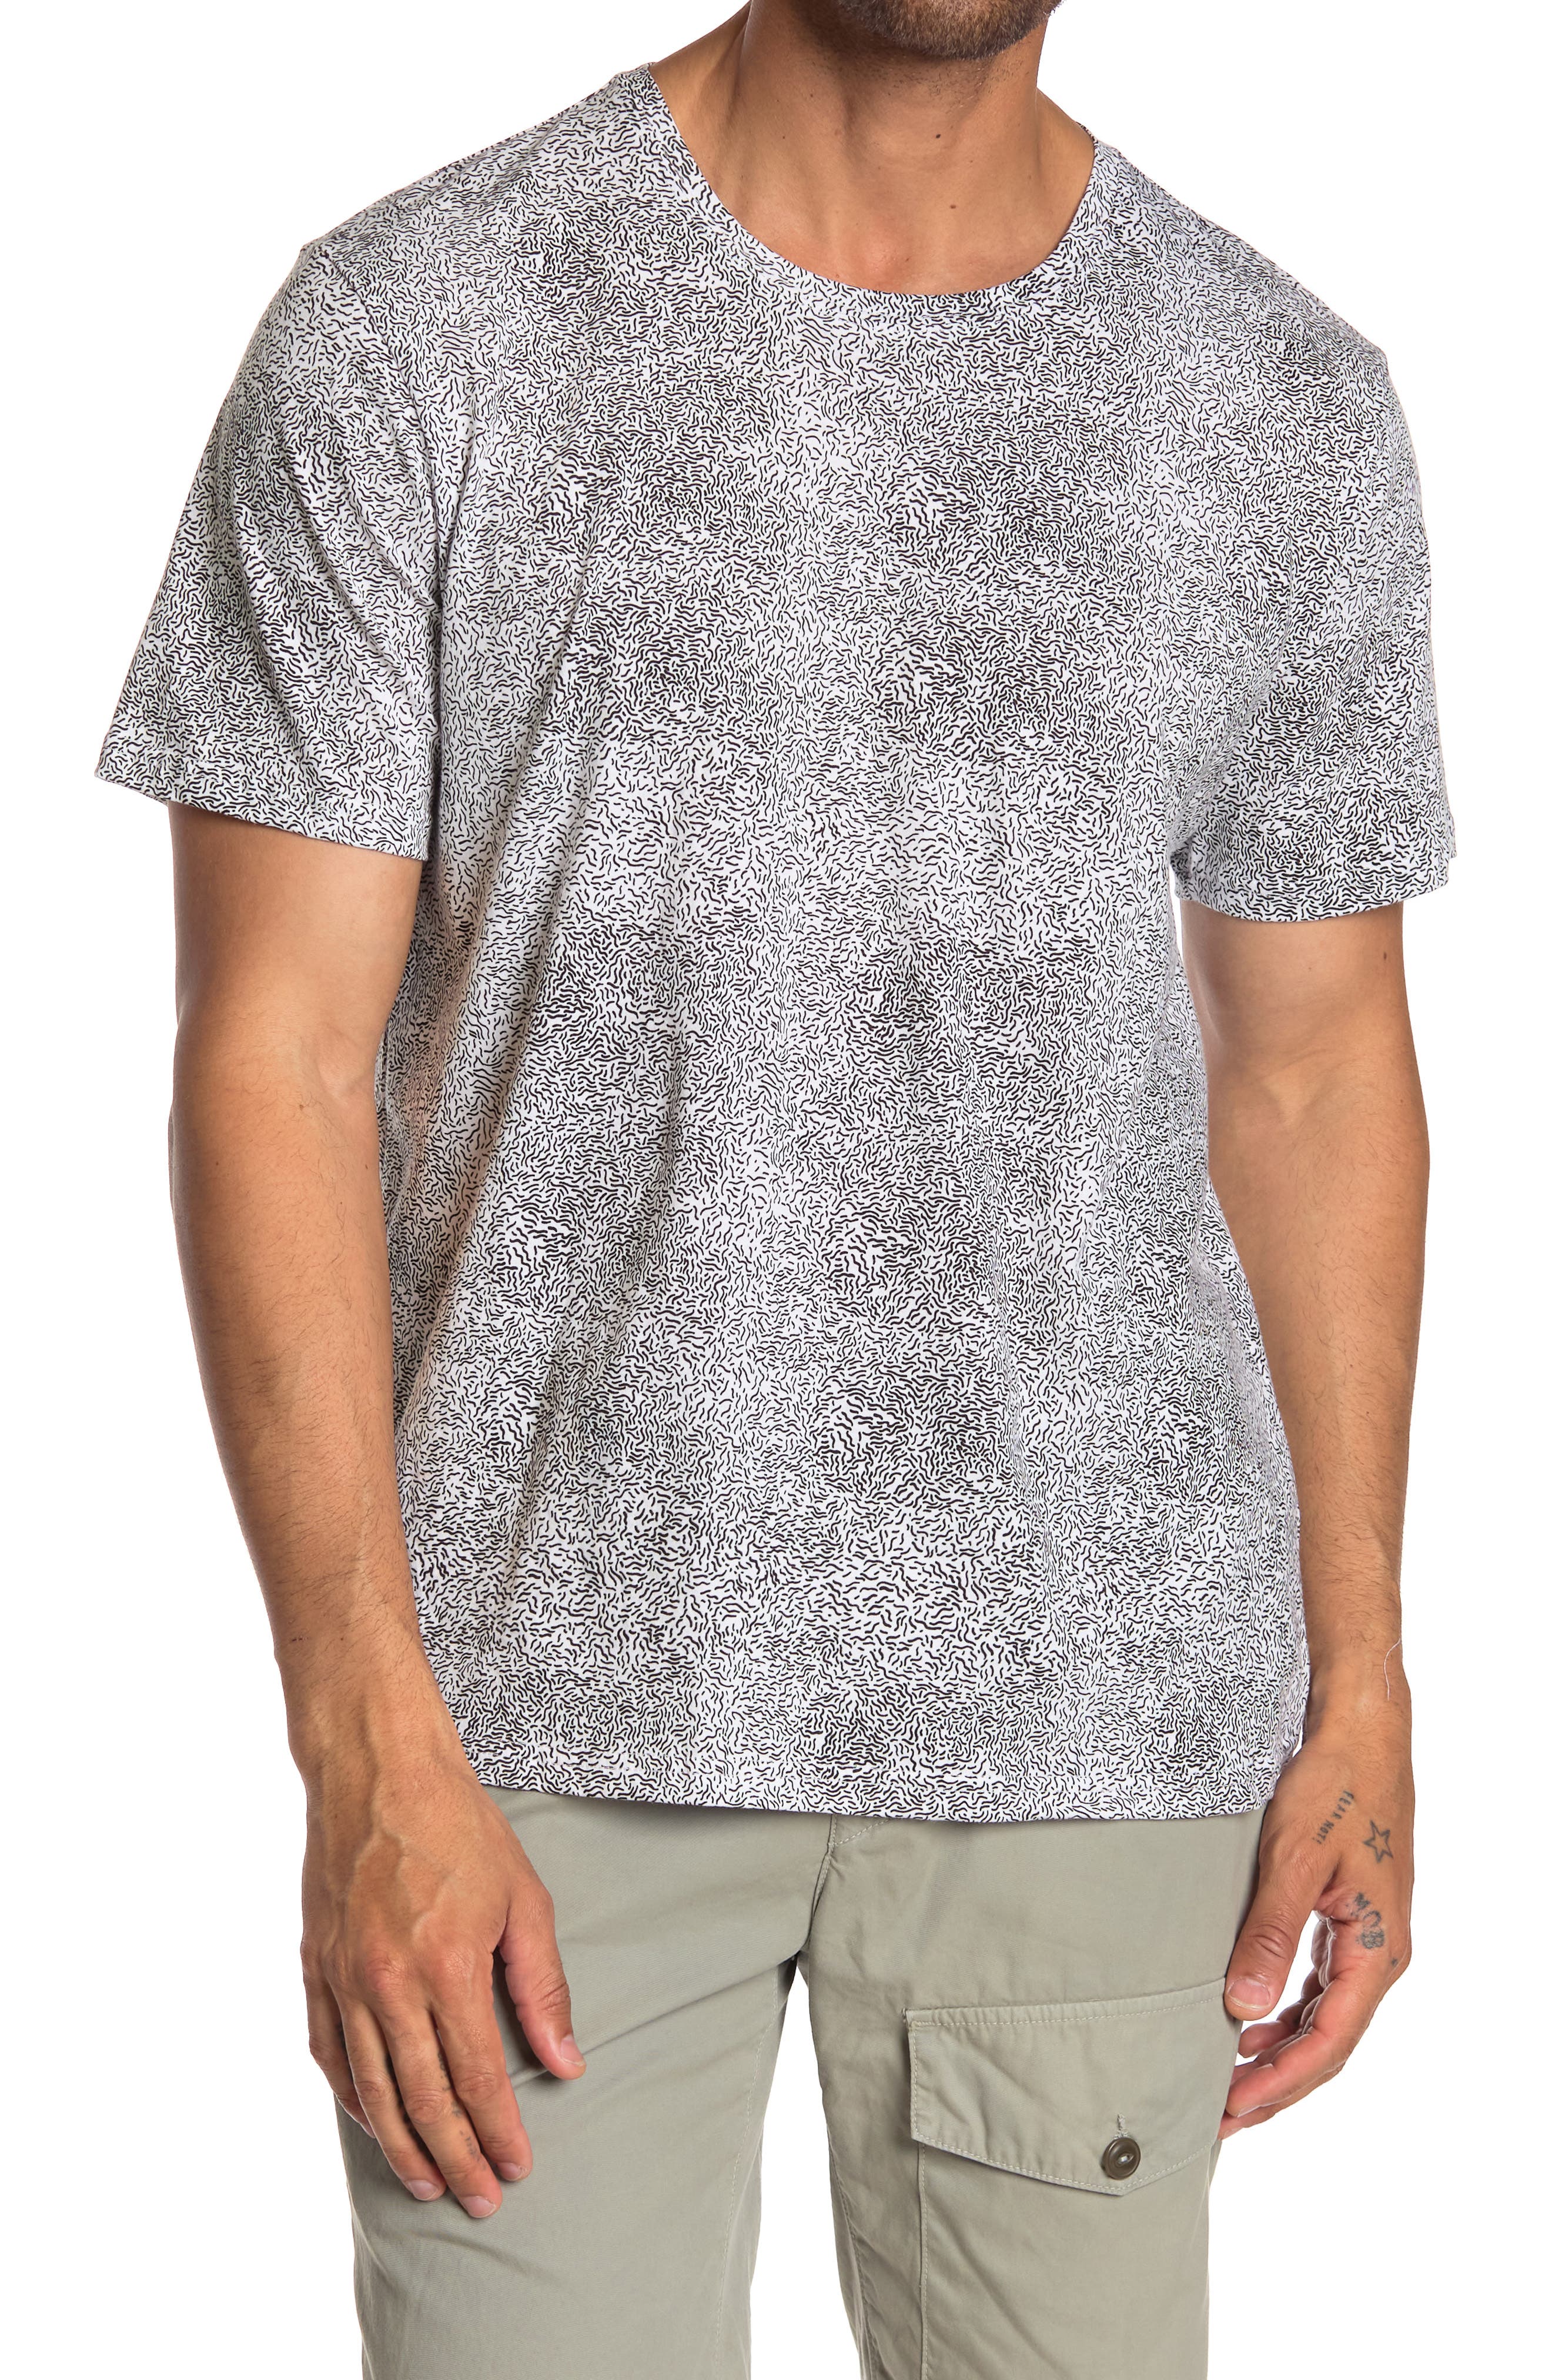 Abound Printed Crew Neck Short Sleeve Shirt In White Black Abstract